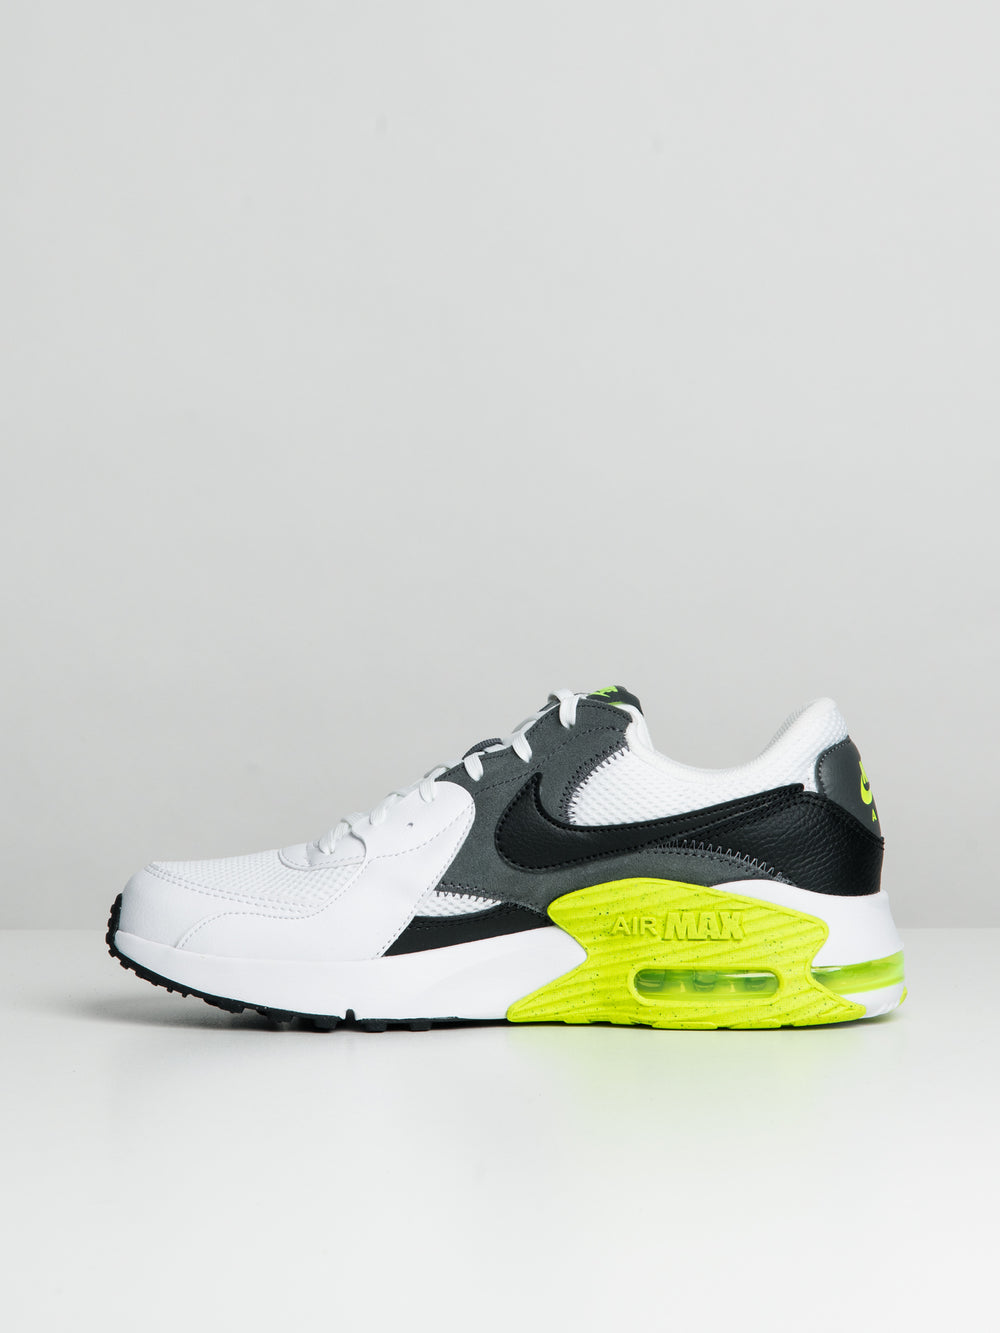 MENS NIKE AIR MAX EXCEE SNEAKER - CLEARANCE